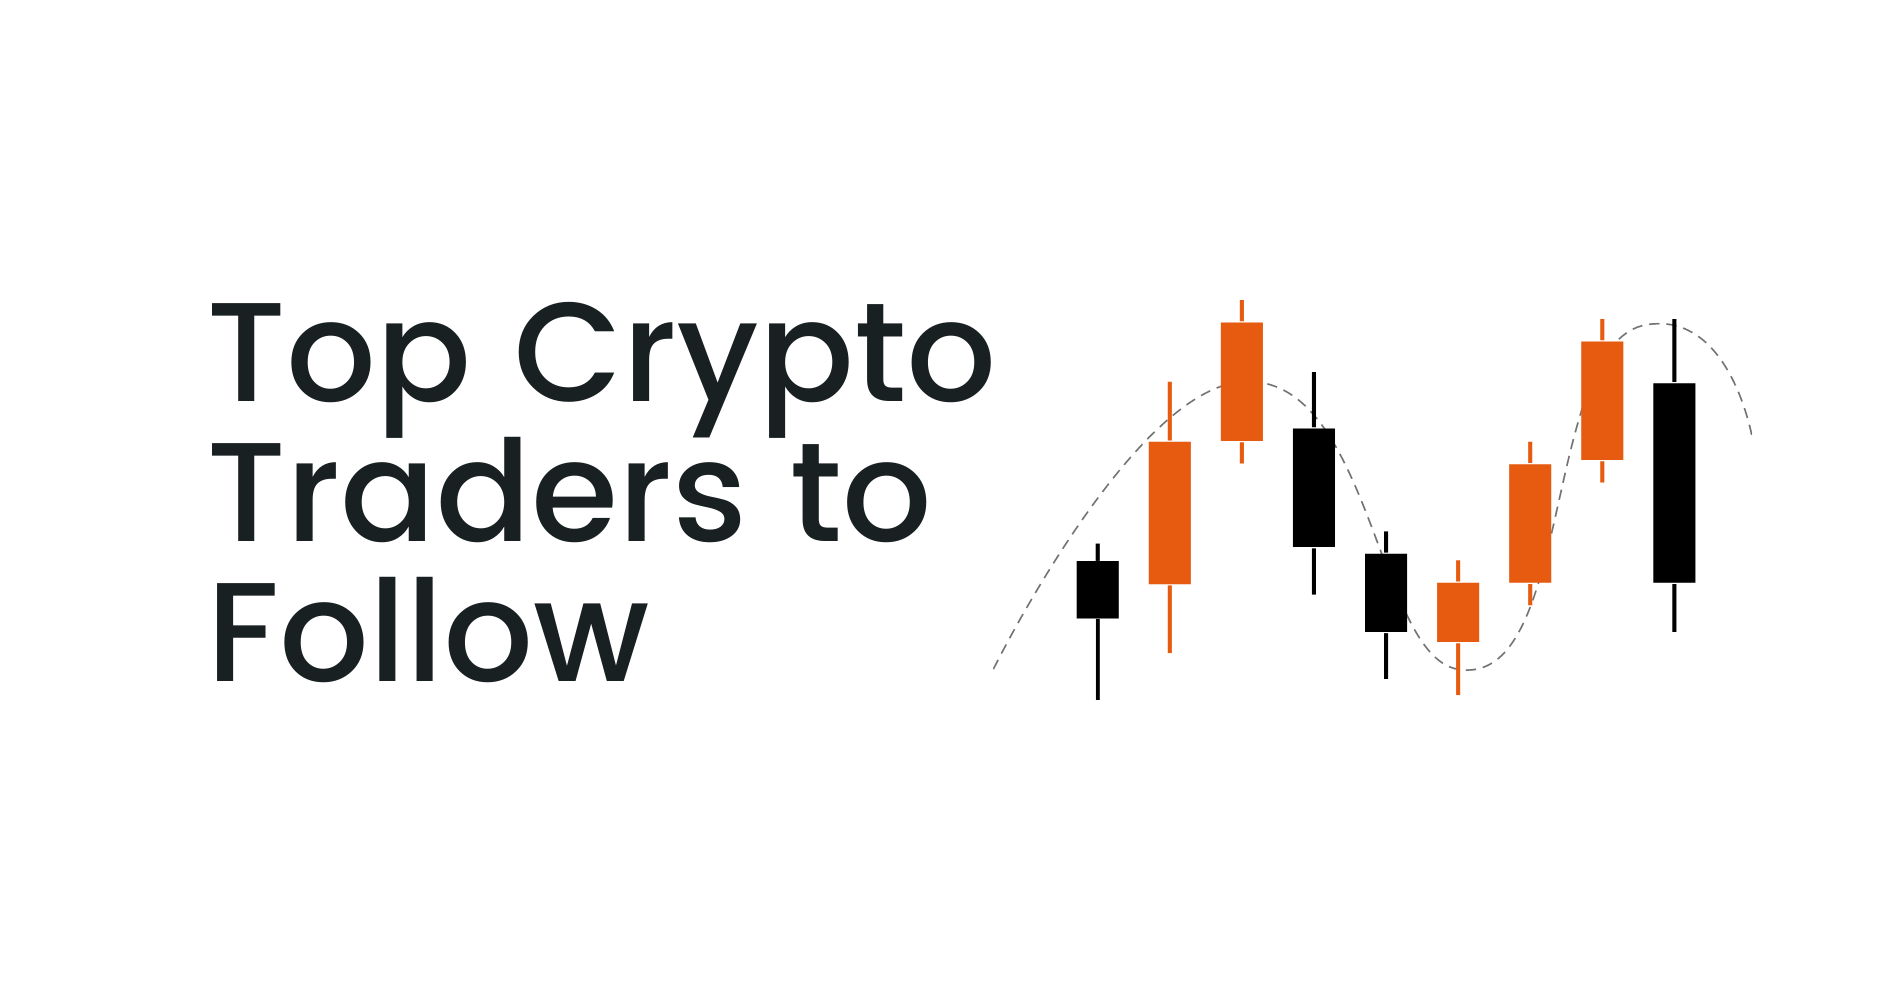 Who Are The Best Crypto Traders To Follow?